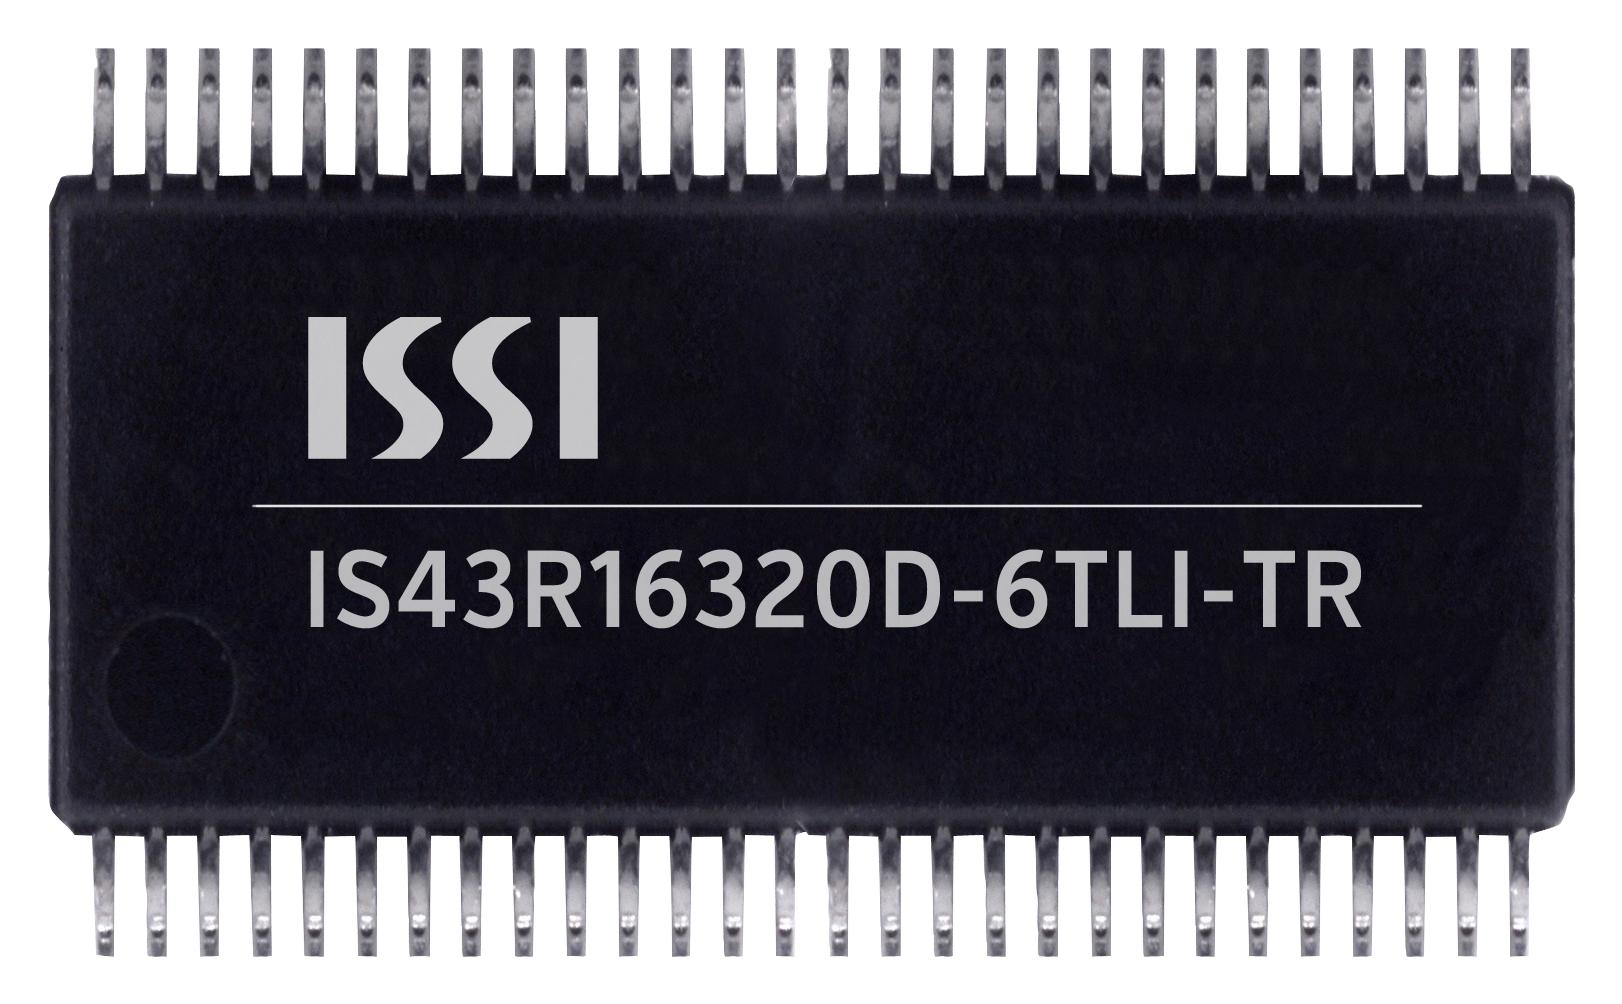 IS43R16320D-6TLI-TR SDRAM, 512MBIT, 166MHZ, TSOP-II-66 INTEGRATED SILICON SOLUTION (ISSI)